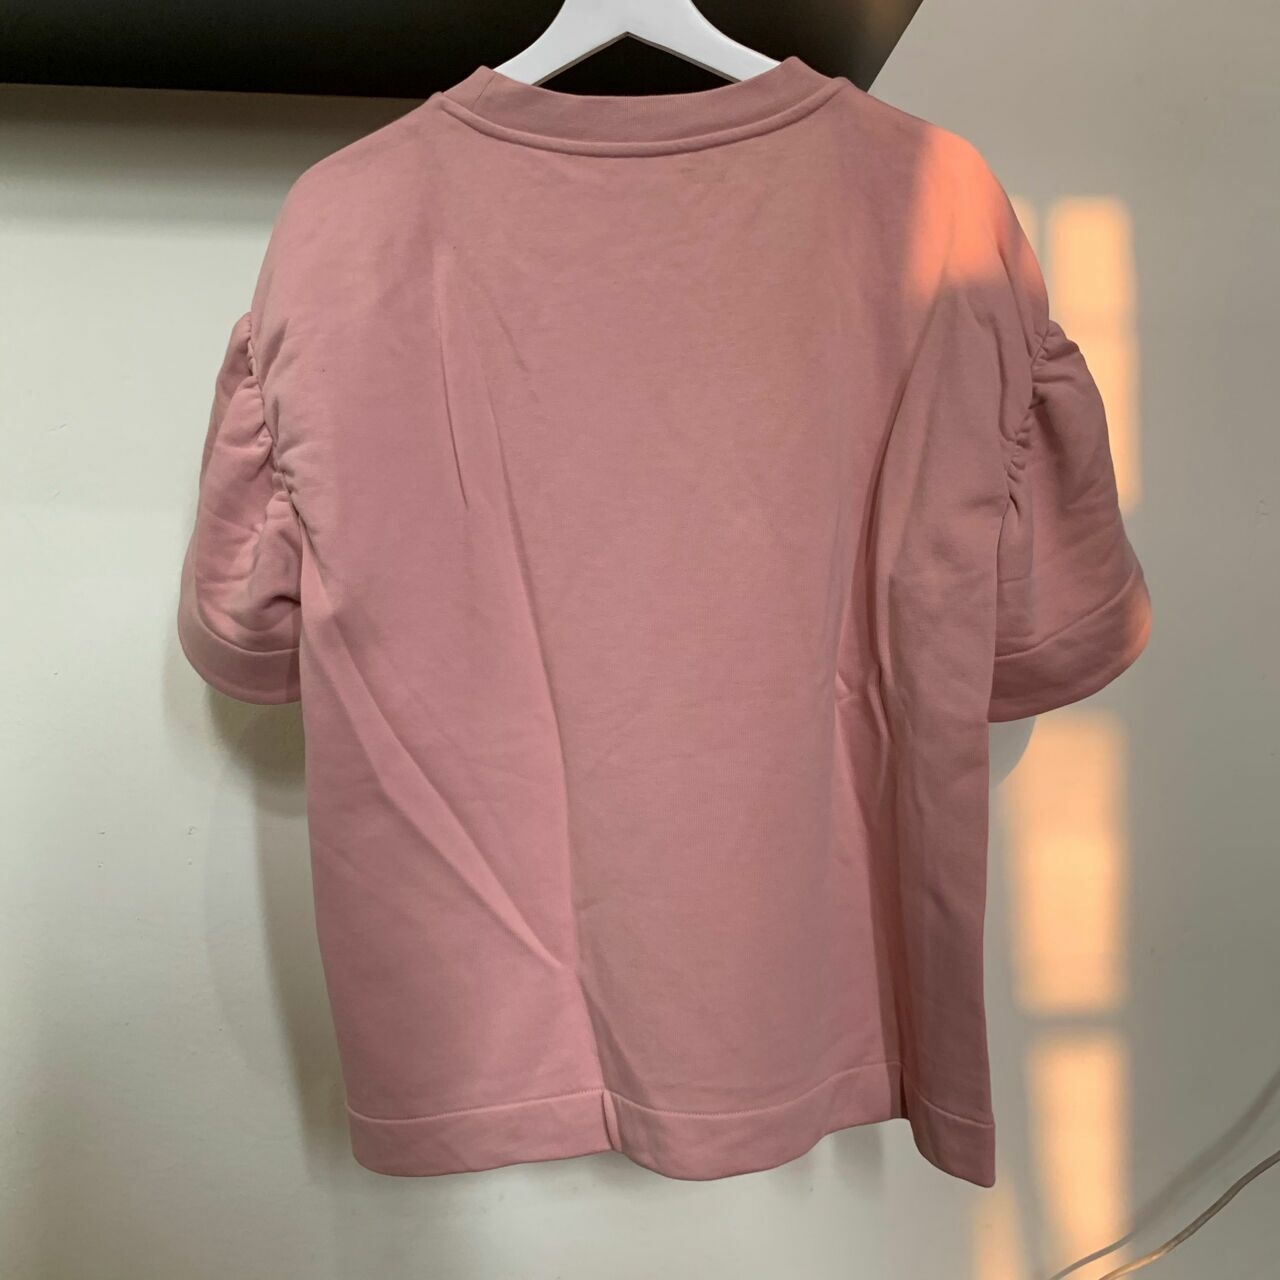 Cos Dusty Pink Blouse